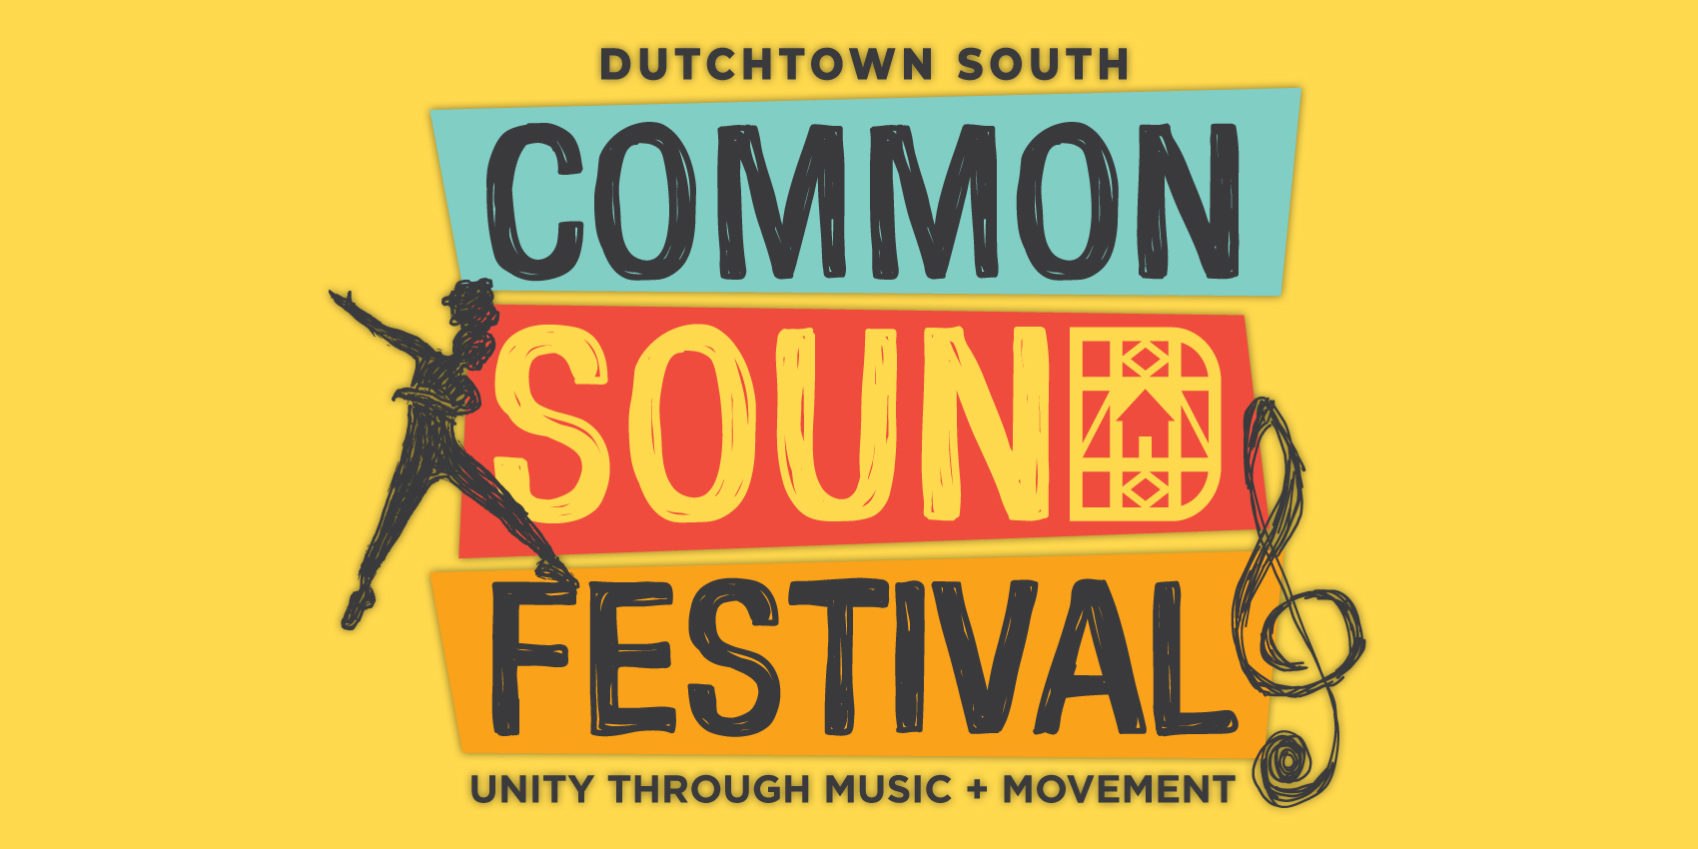 Dutchtown South Common Sound Festival: Unity through Music and Movement.